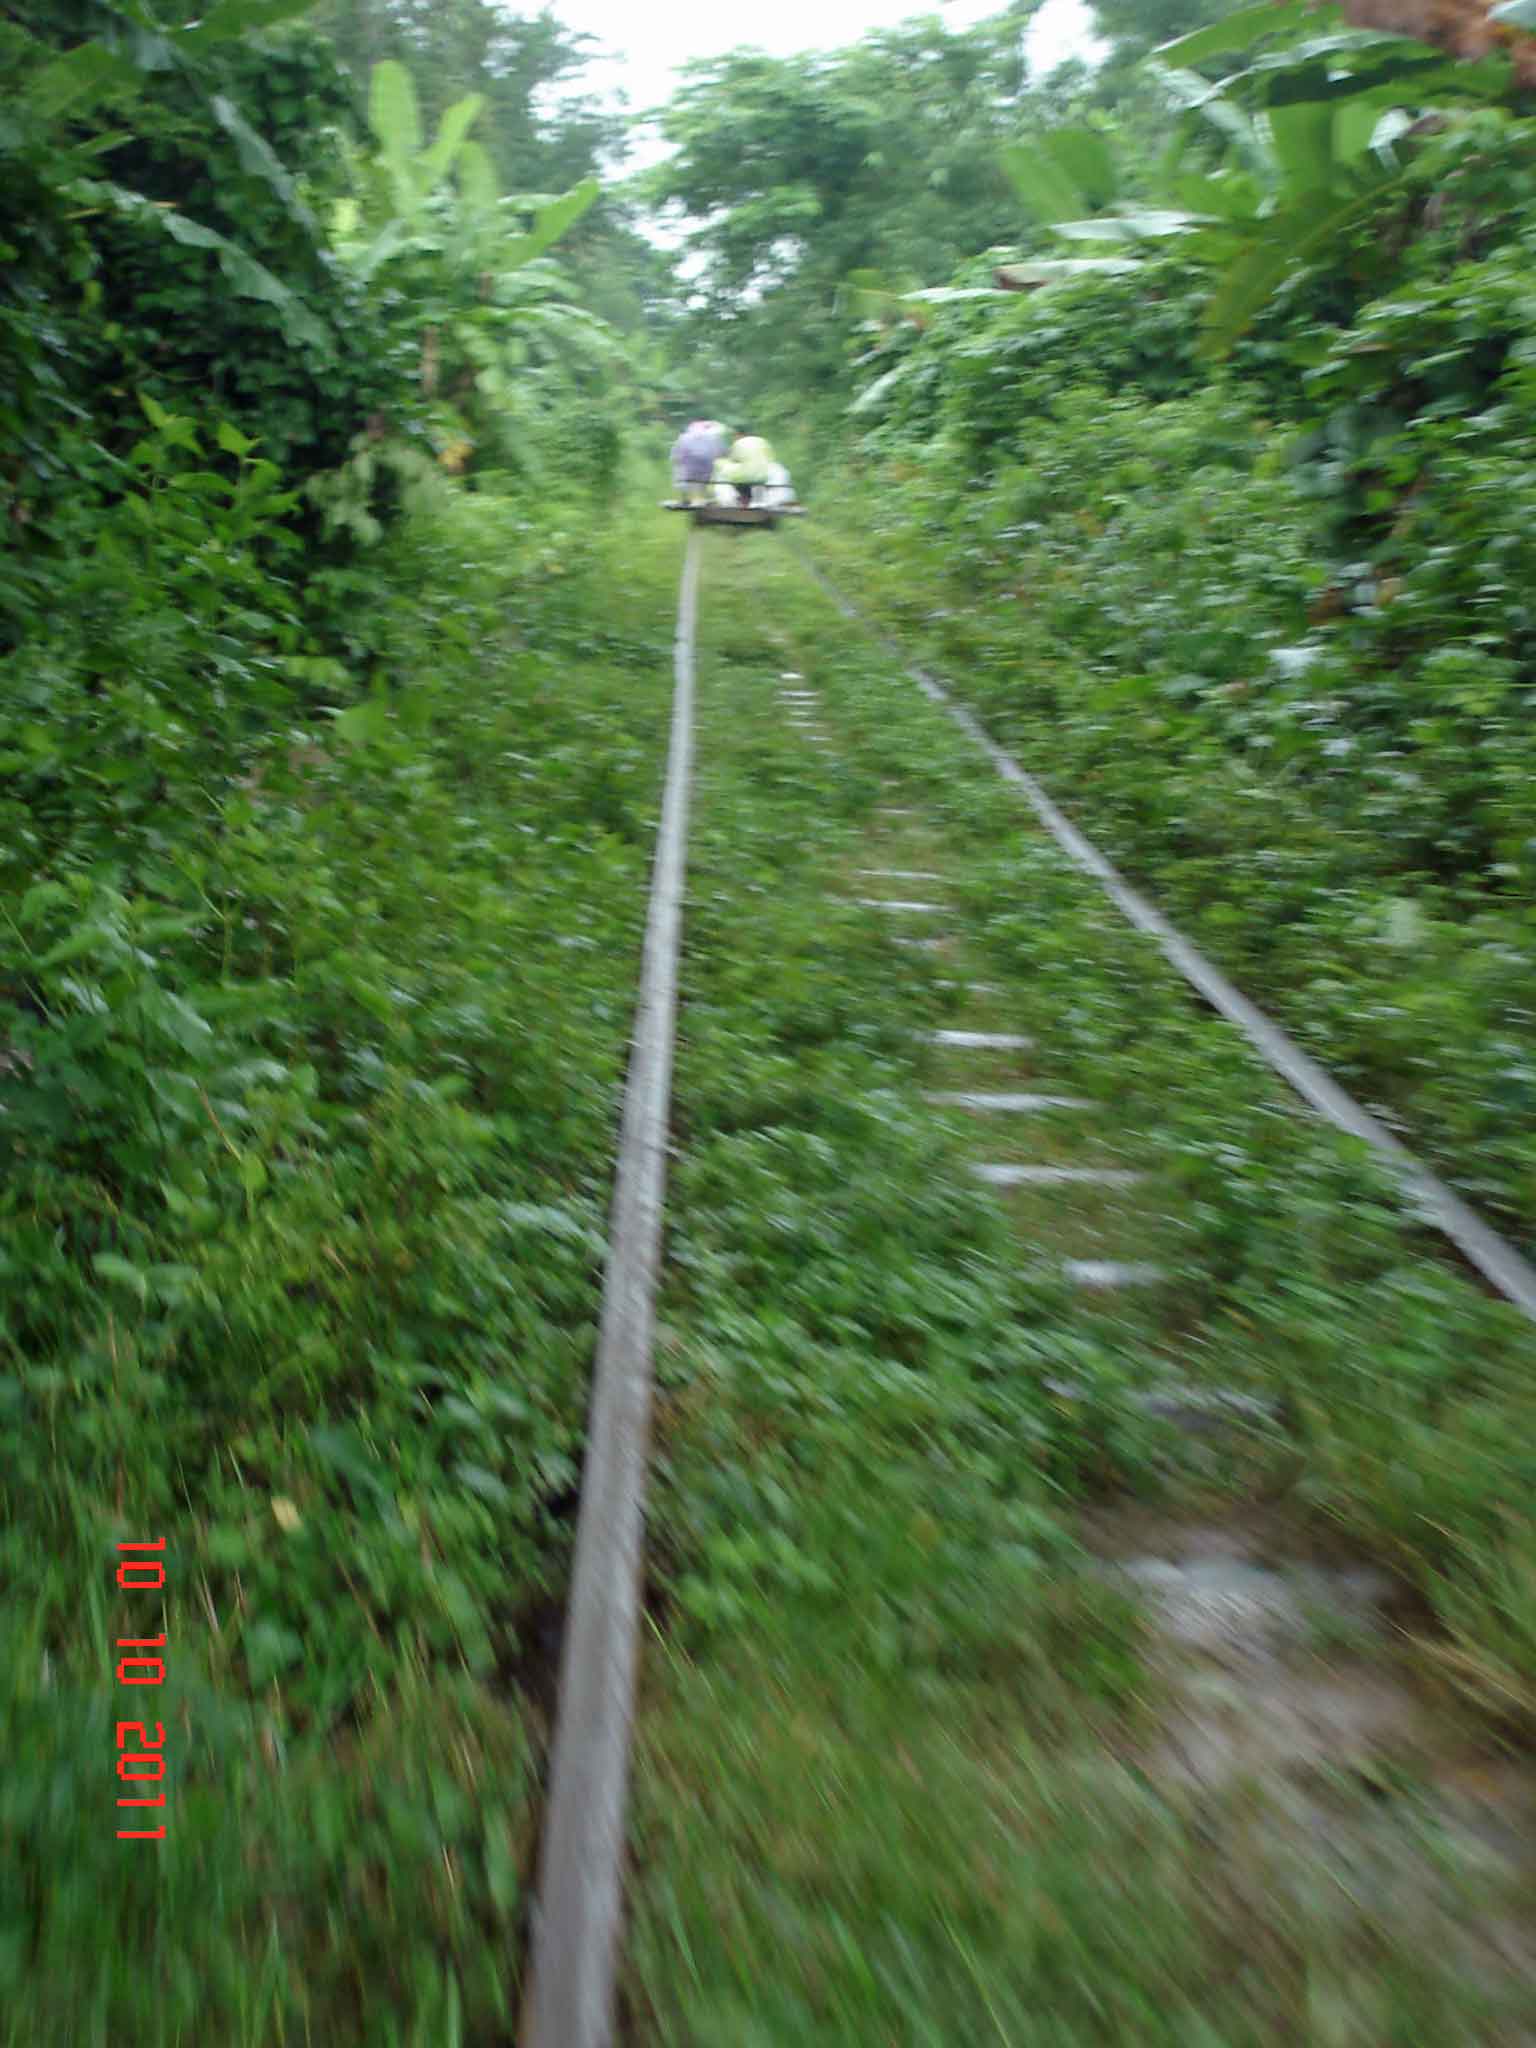 Fast and furious, a ride on a Norry or bamboo train,outside Battambang